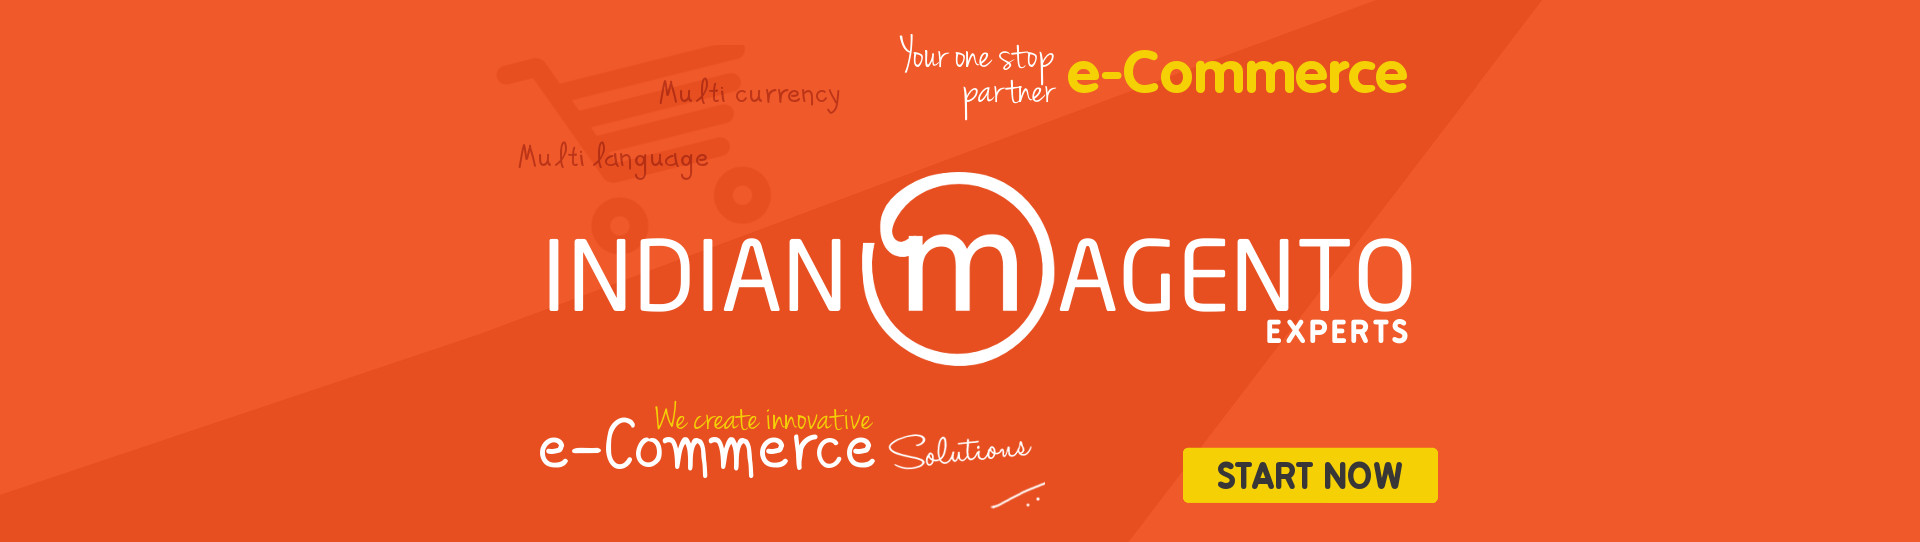 Indian Magento Experts